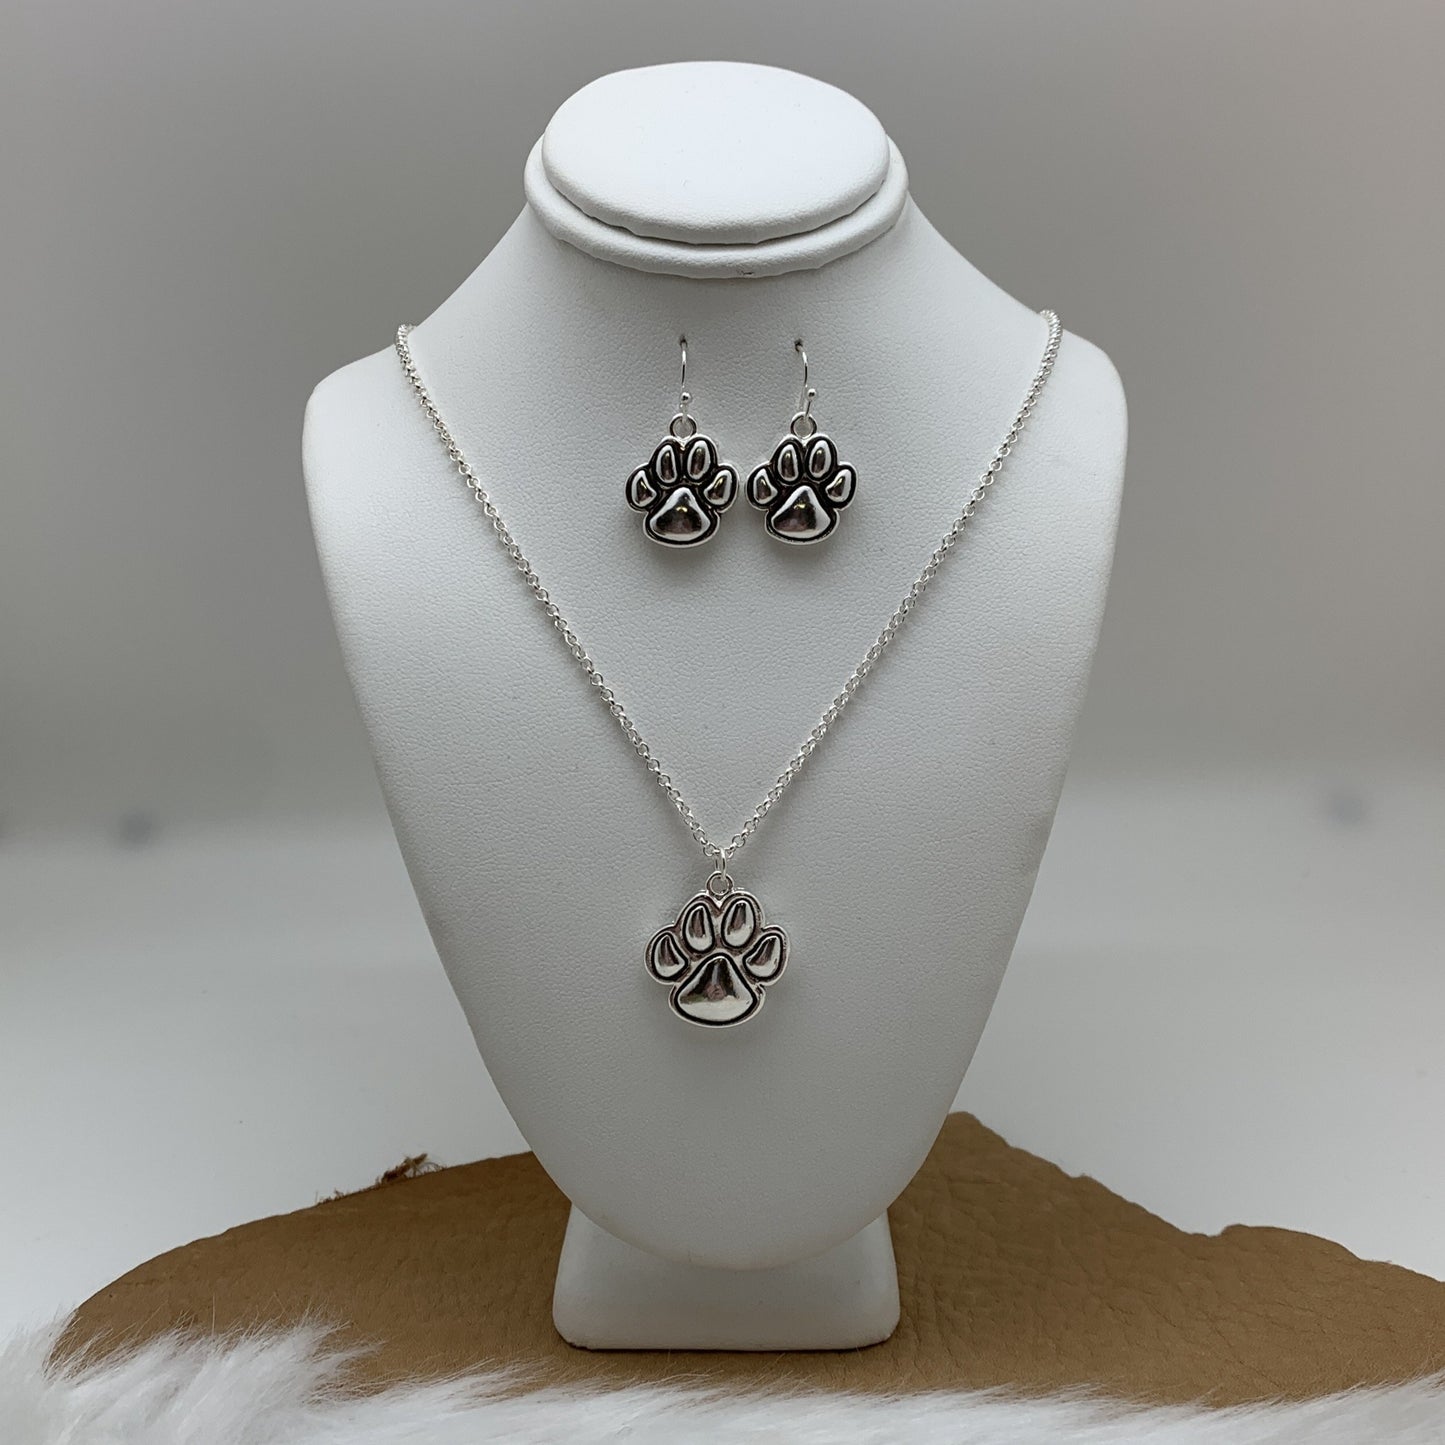 SILVER NECKLACE WITH PAW PENDANT SET